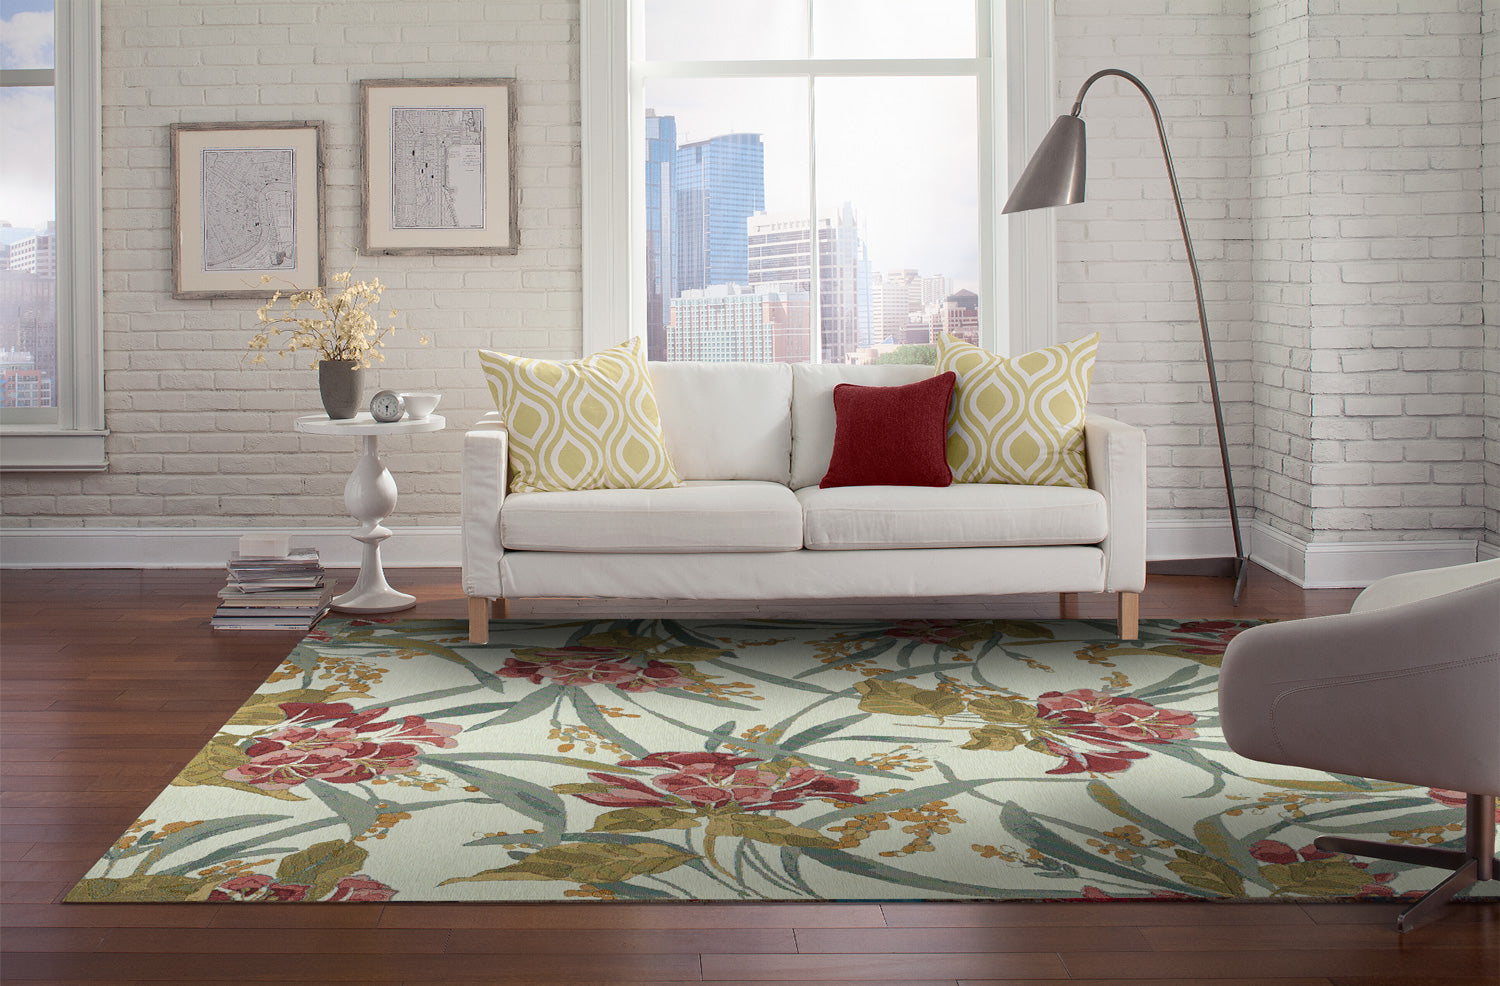 Floral Rugs 101 - Everything you need to know to make it Work!